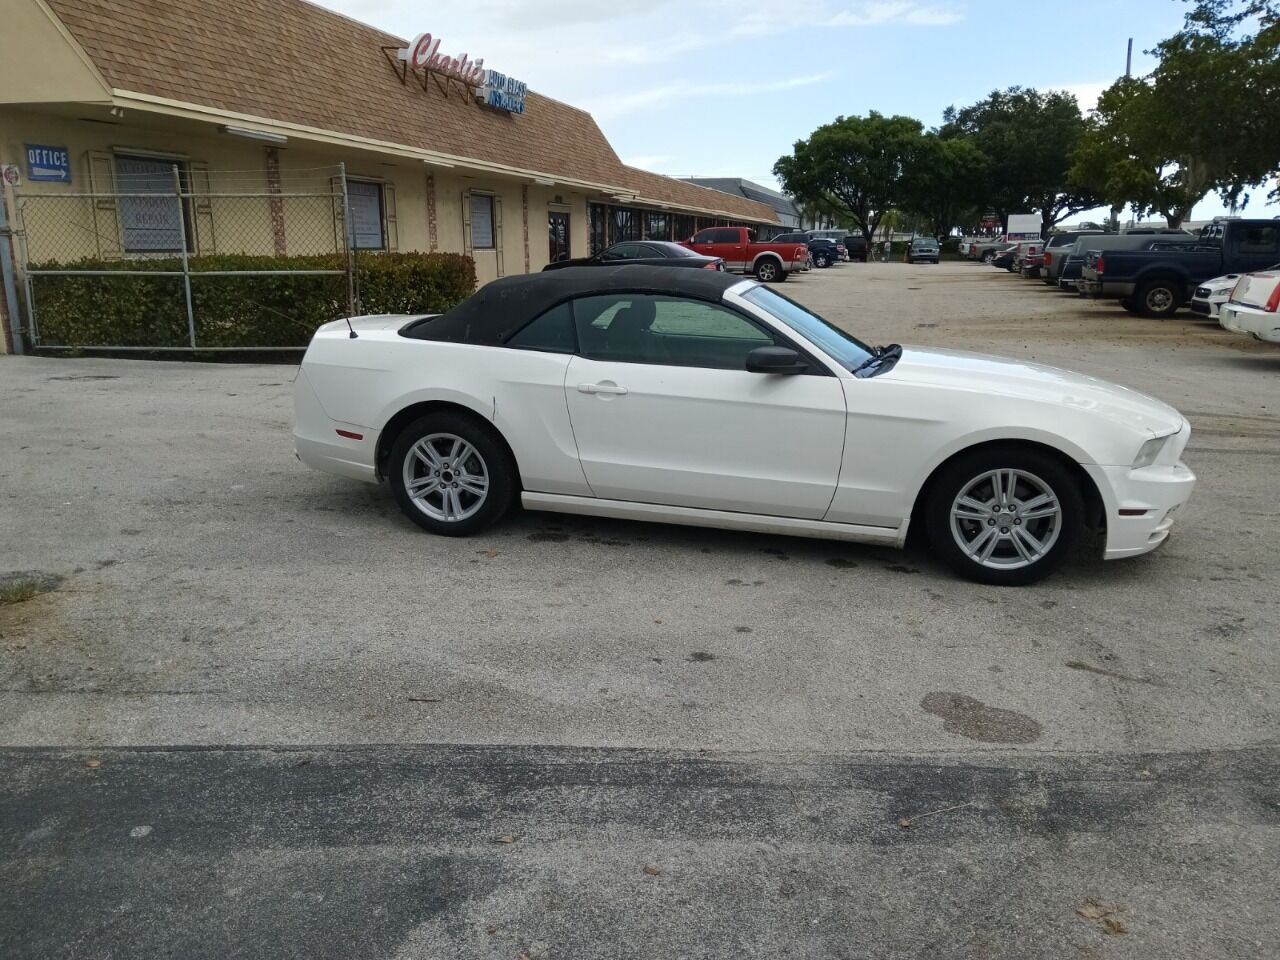 2013 Ford Mustang Convertible - $7,950